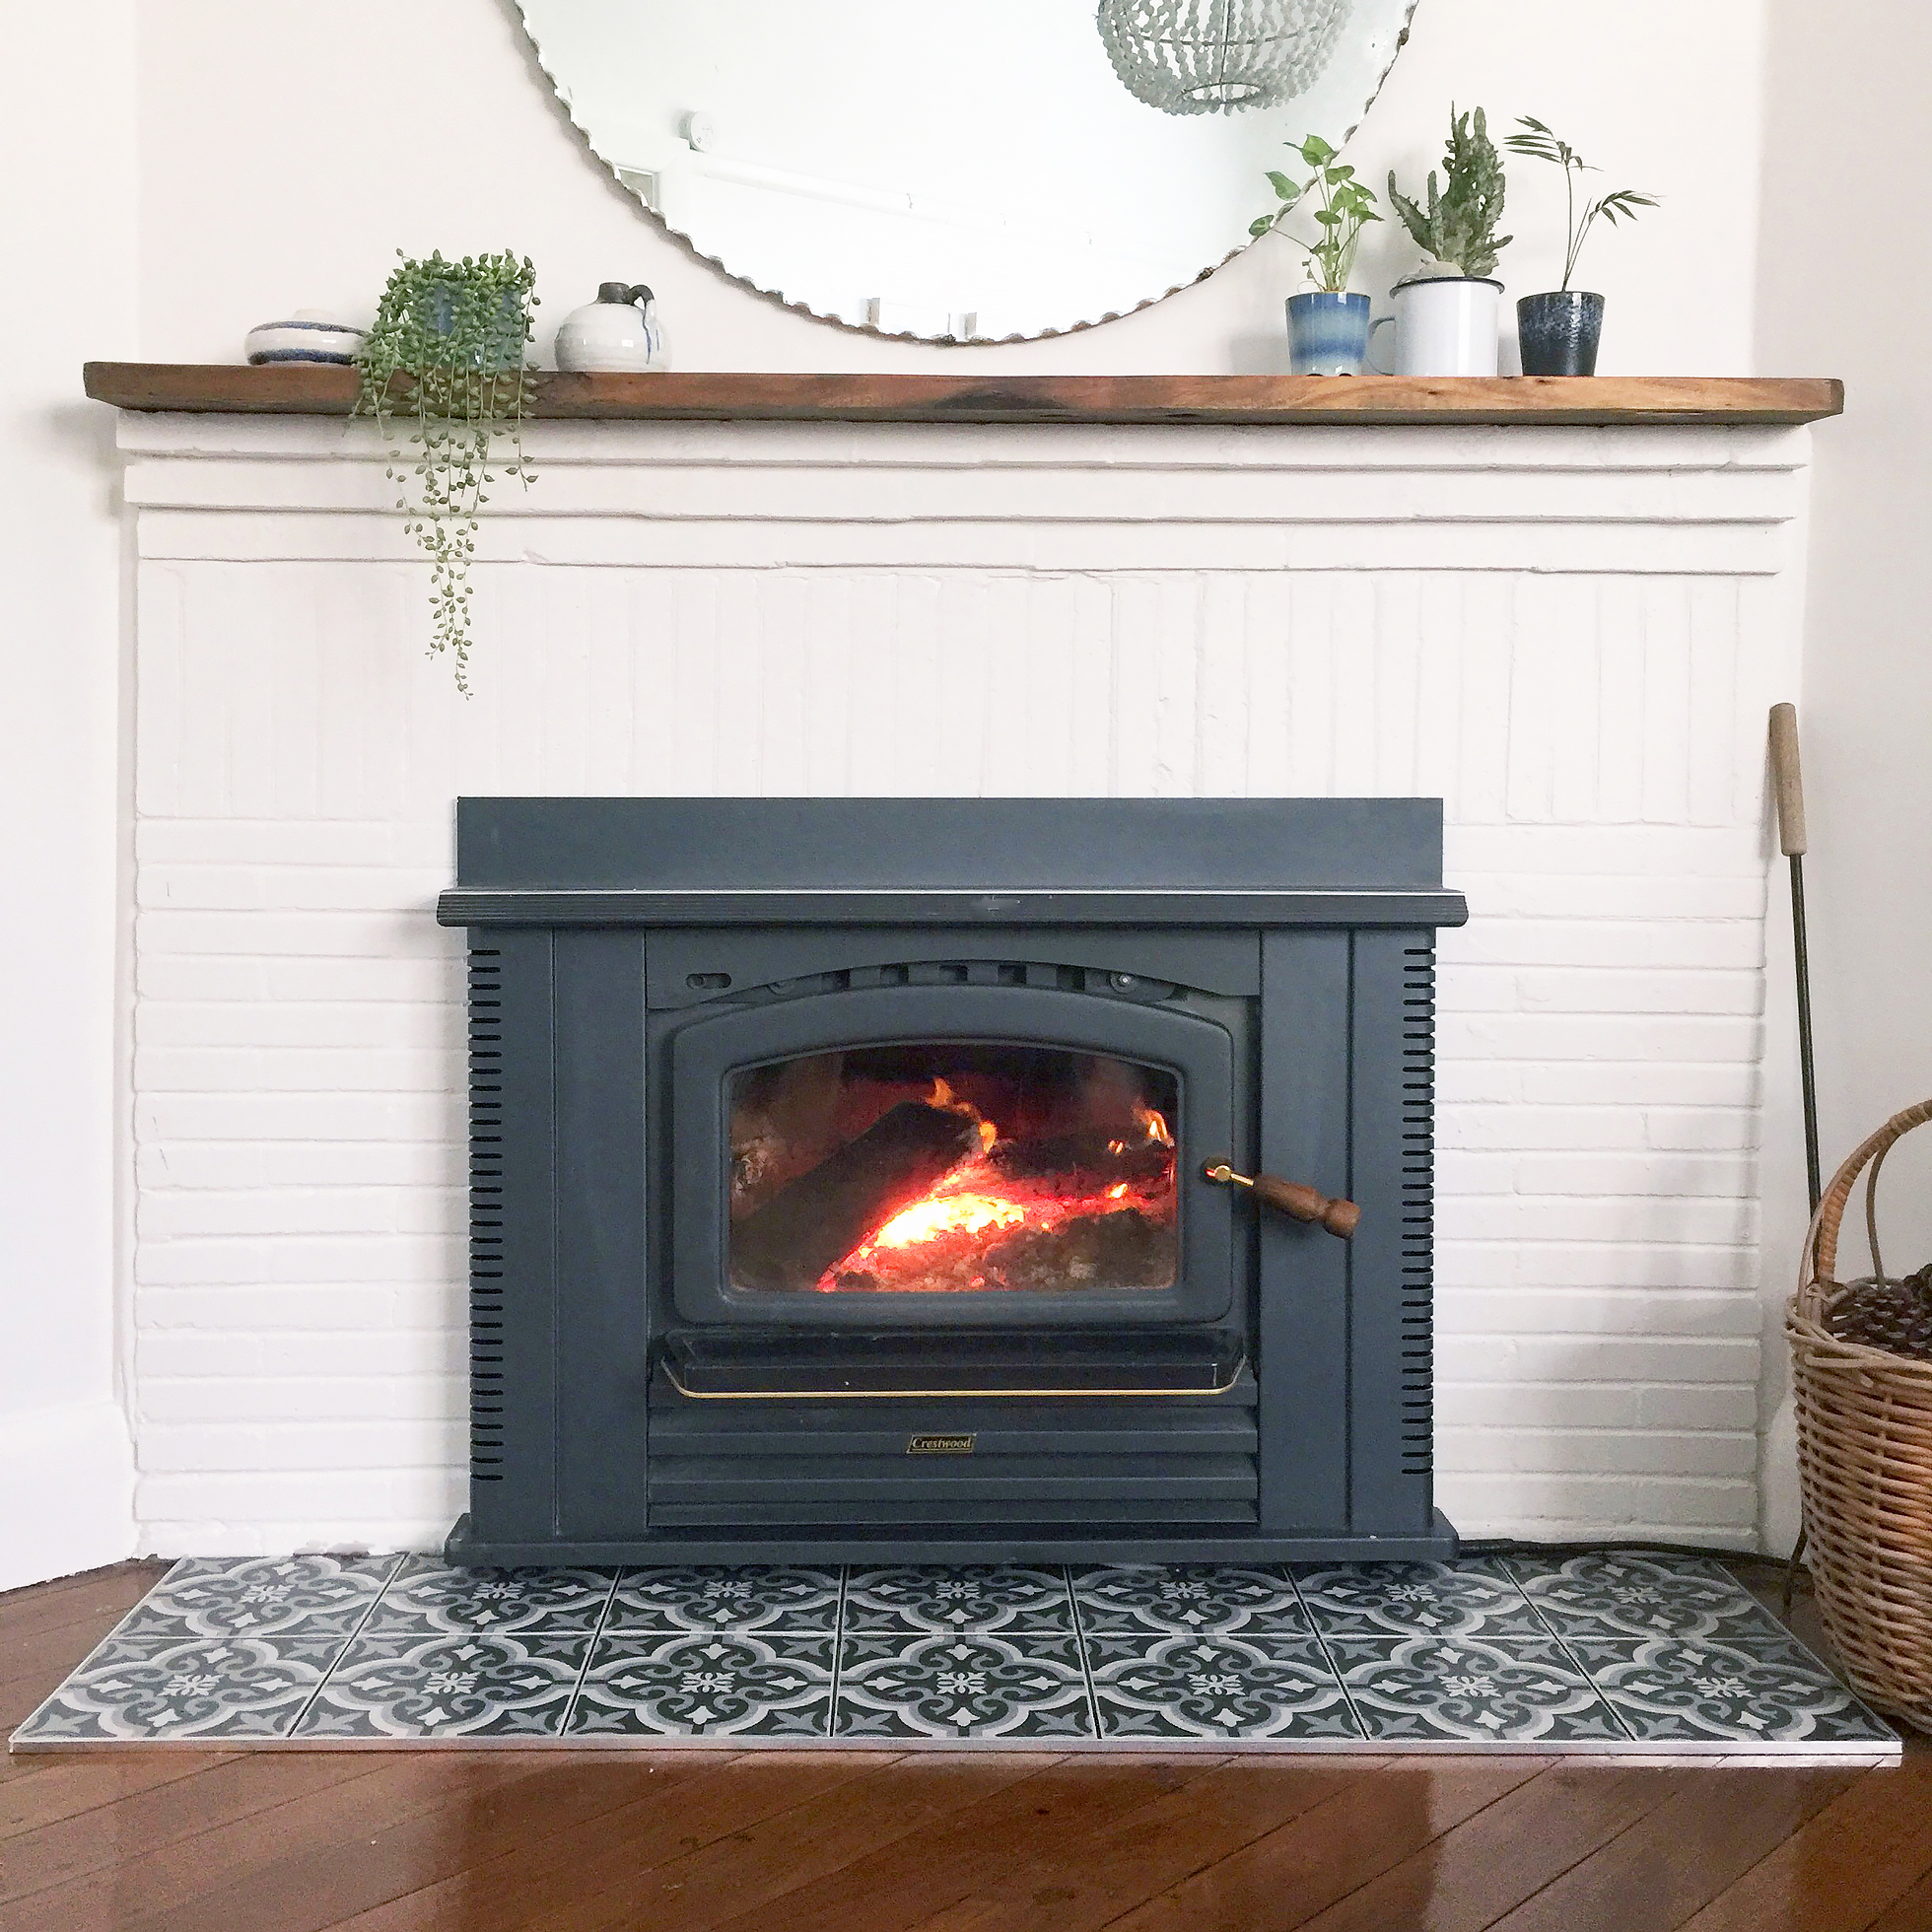 A beige-painted brick fireplace with black slate tiles